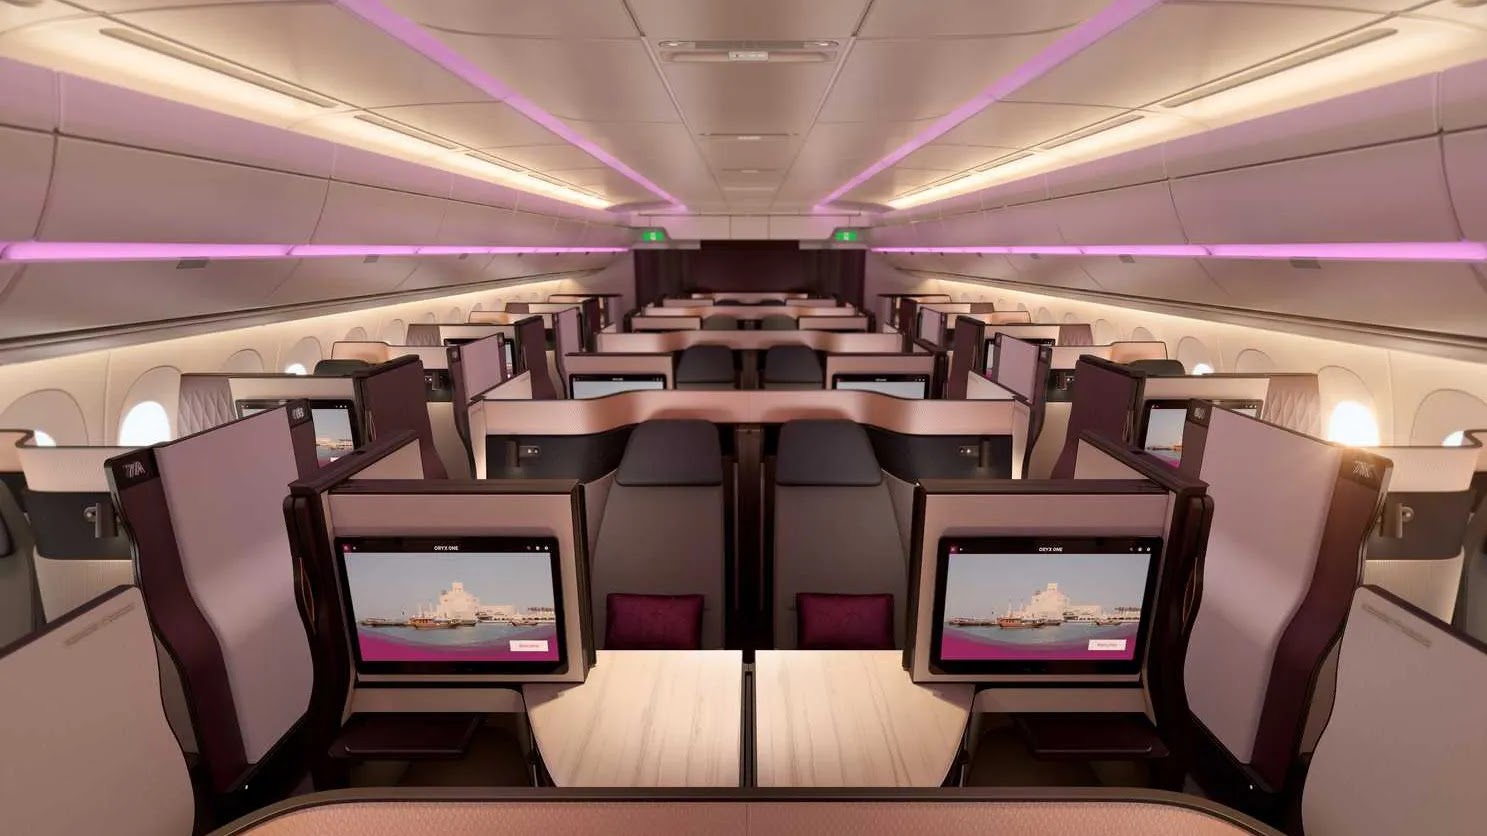 New business travel strategy from Virgin and Qatar